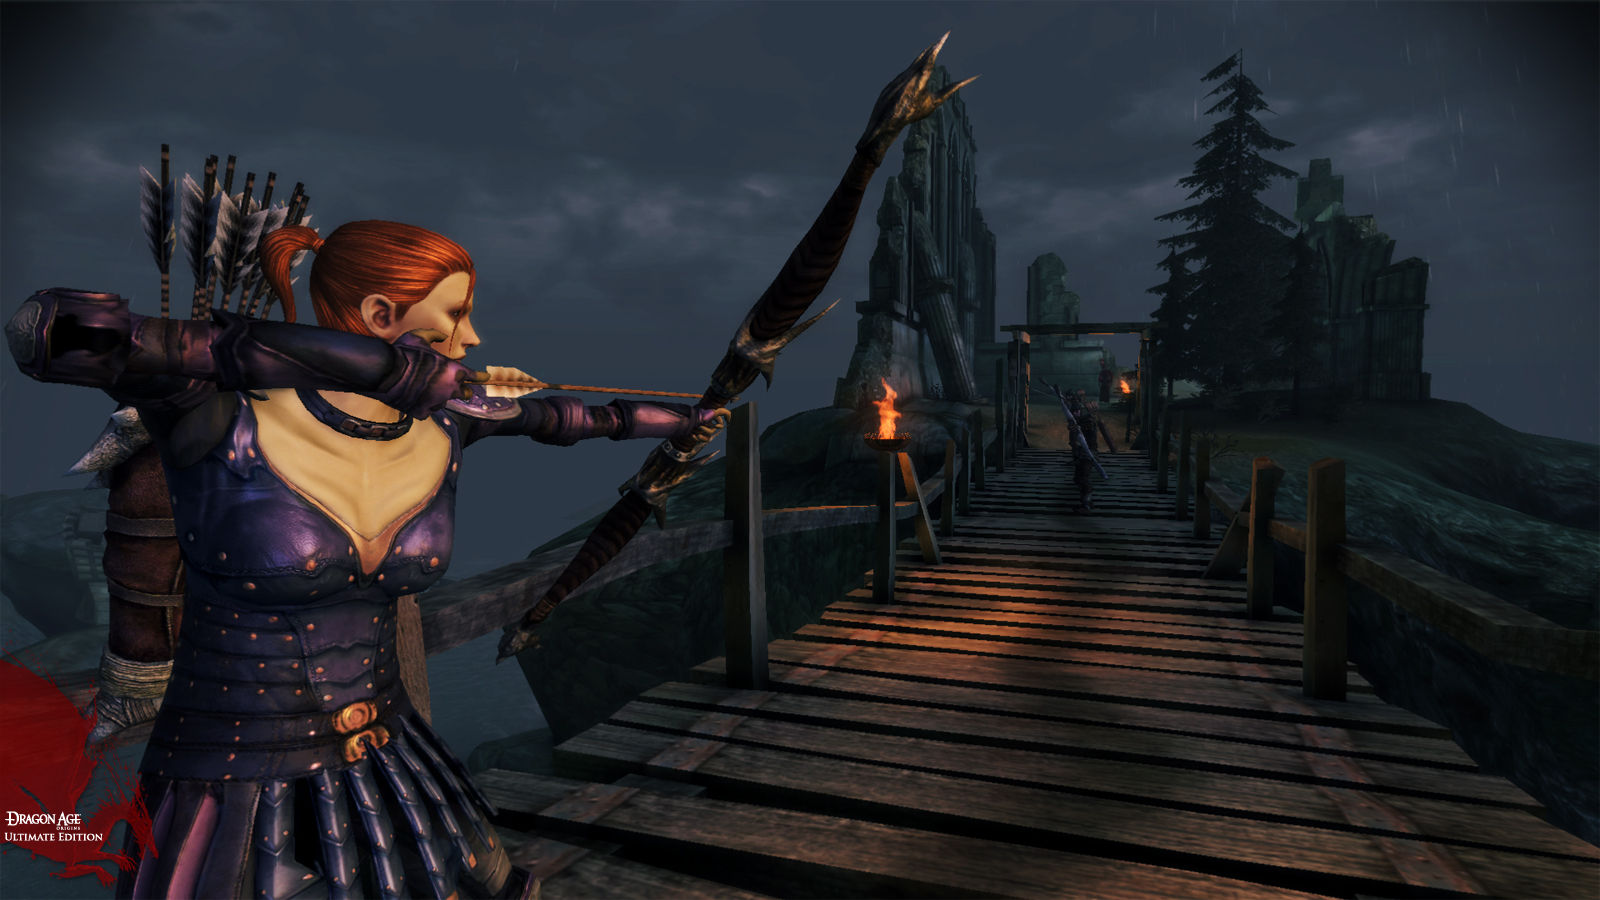 Dragon Age character taking aim with a bow